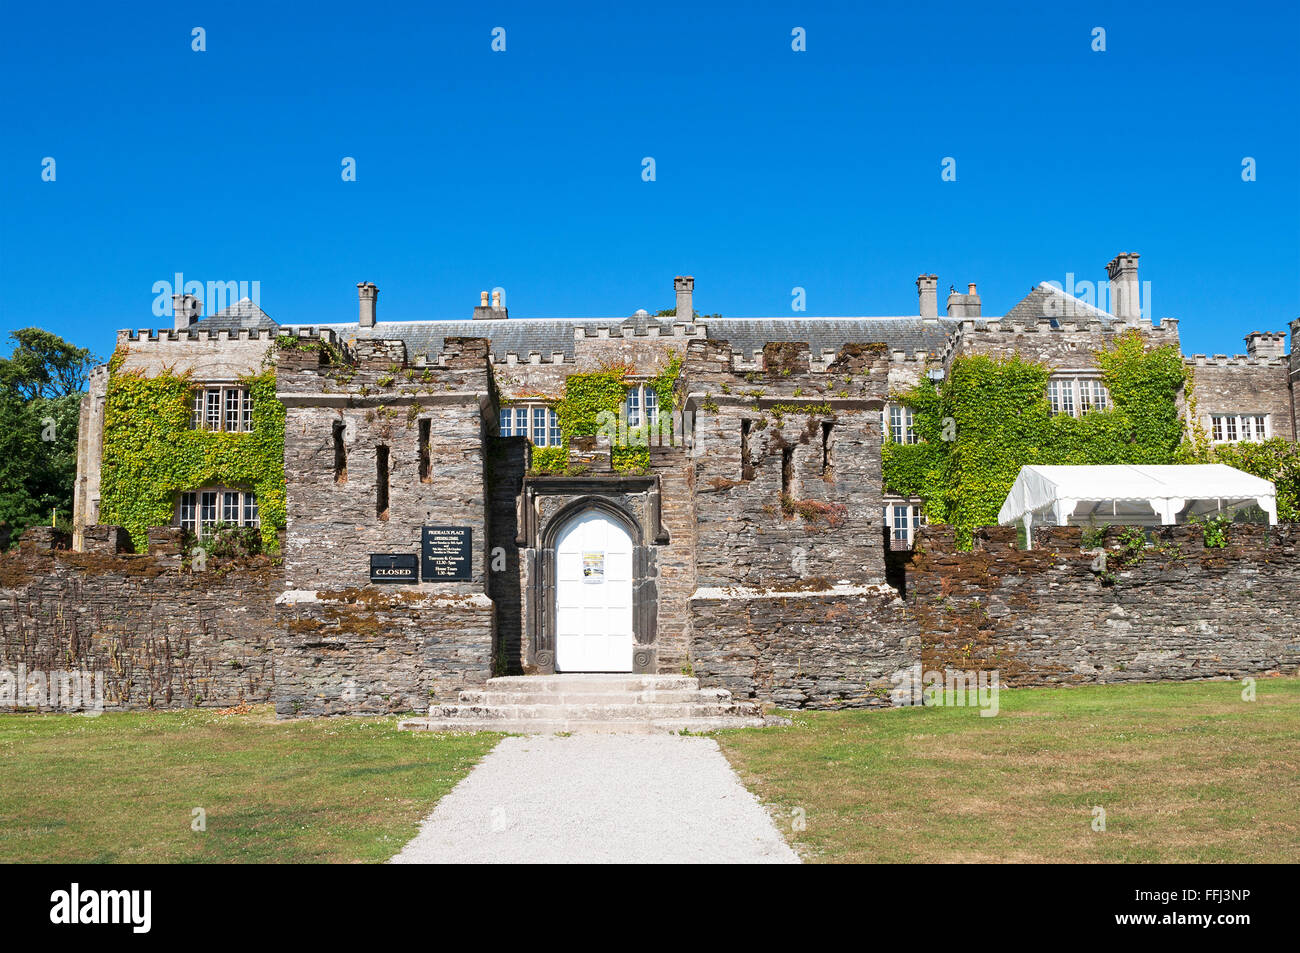 The entrance to Prideaux place in Padstow, Cornwall, England, UK Stock Photo